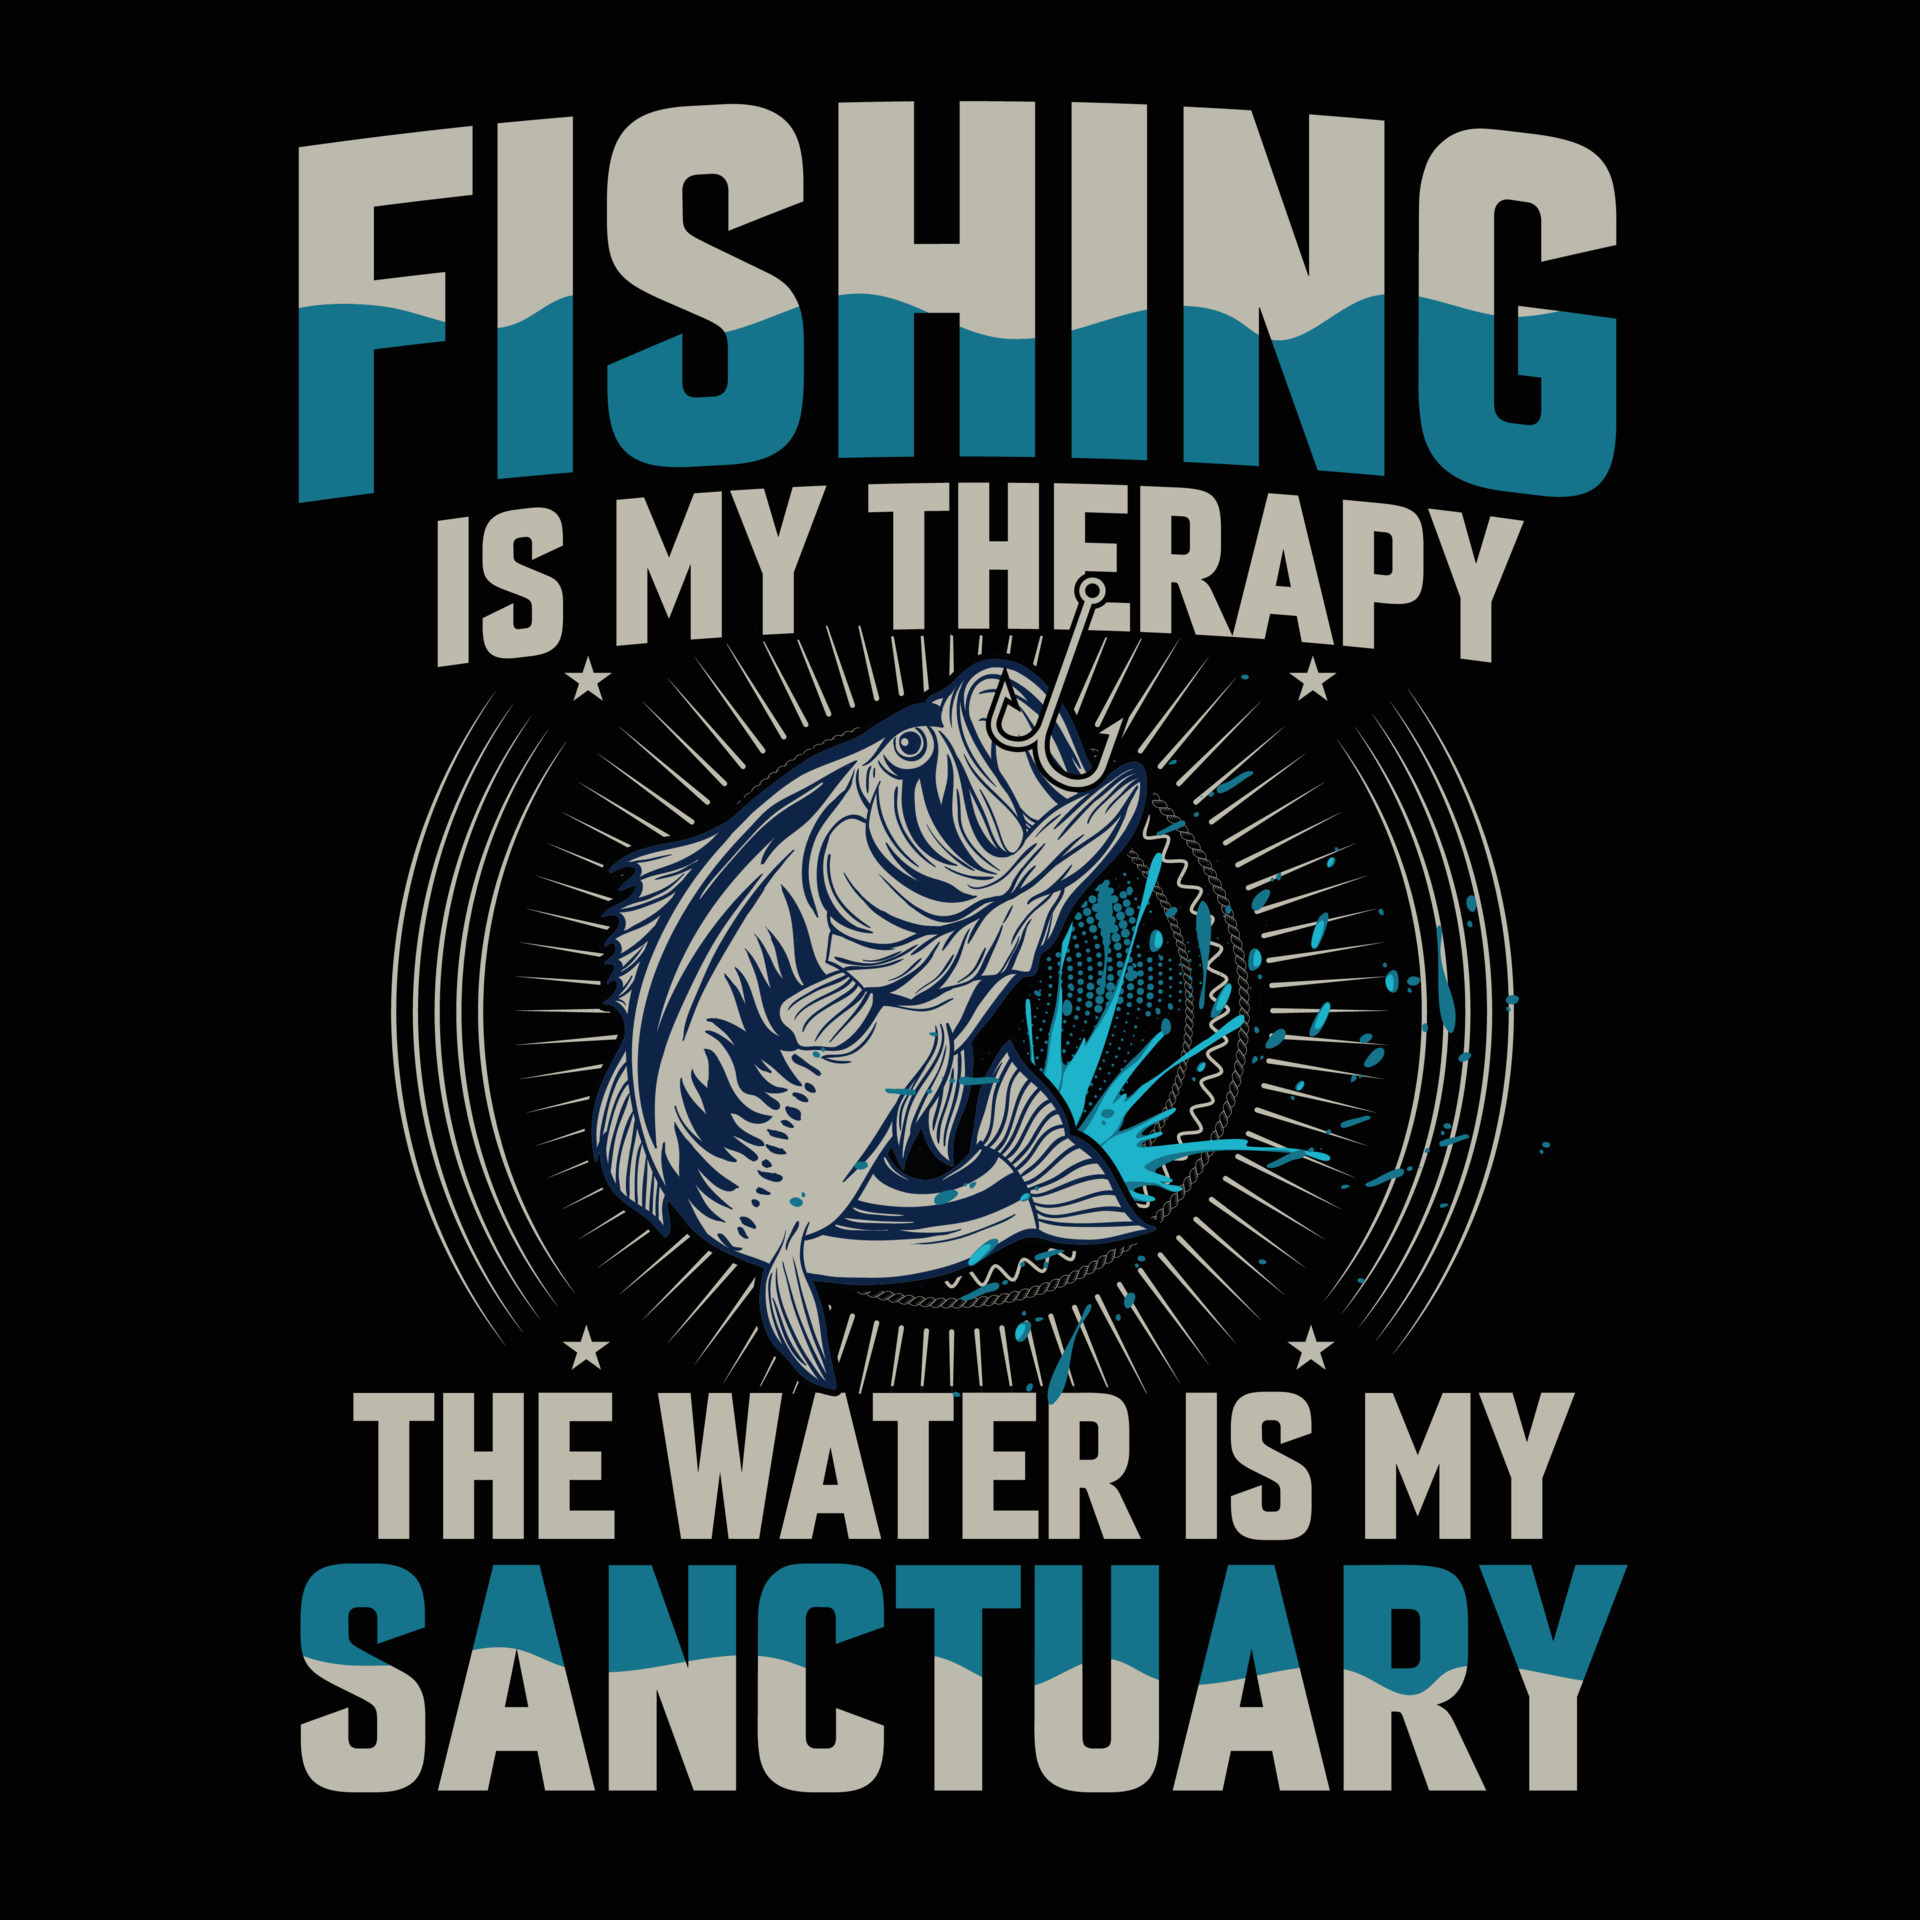 https://static.vecteezy.com/system/resources/previews/024/266/201/original/fishing-t-shirt-fishing-therapy-sanctuary-mens-fishing-t-shirt-funny-fishing-shirt-fishing-graphic-tee-fisherman-gifts-present-for-the-fisherman-vector.jpg